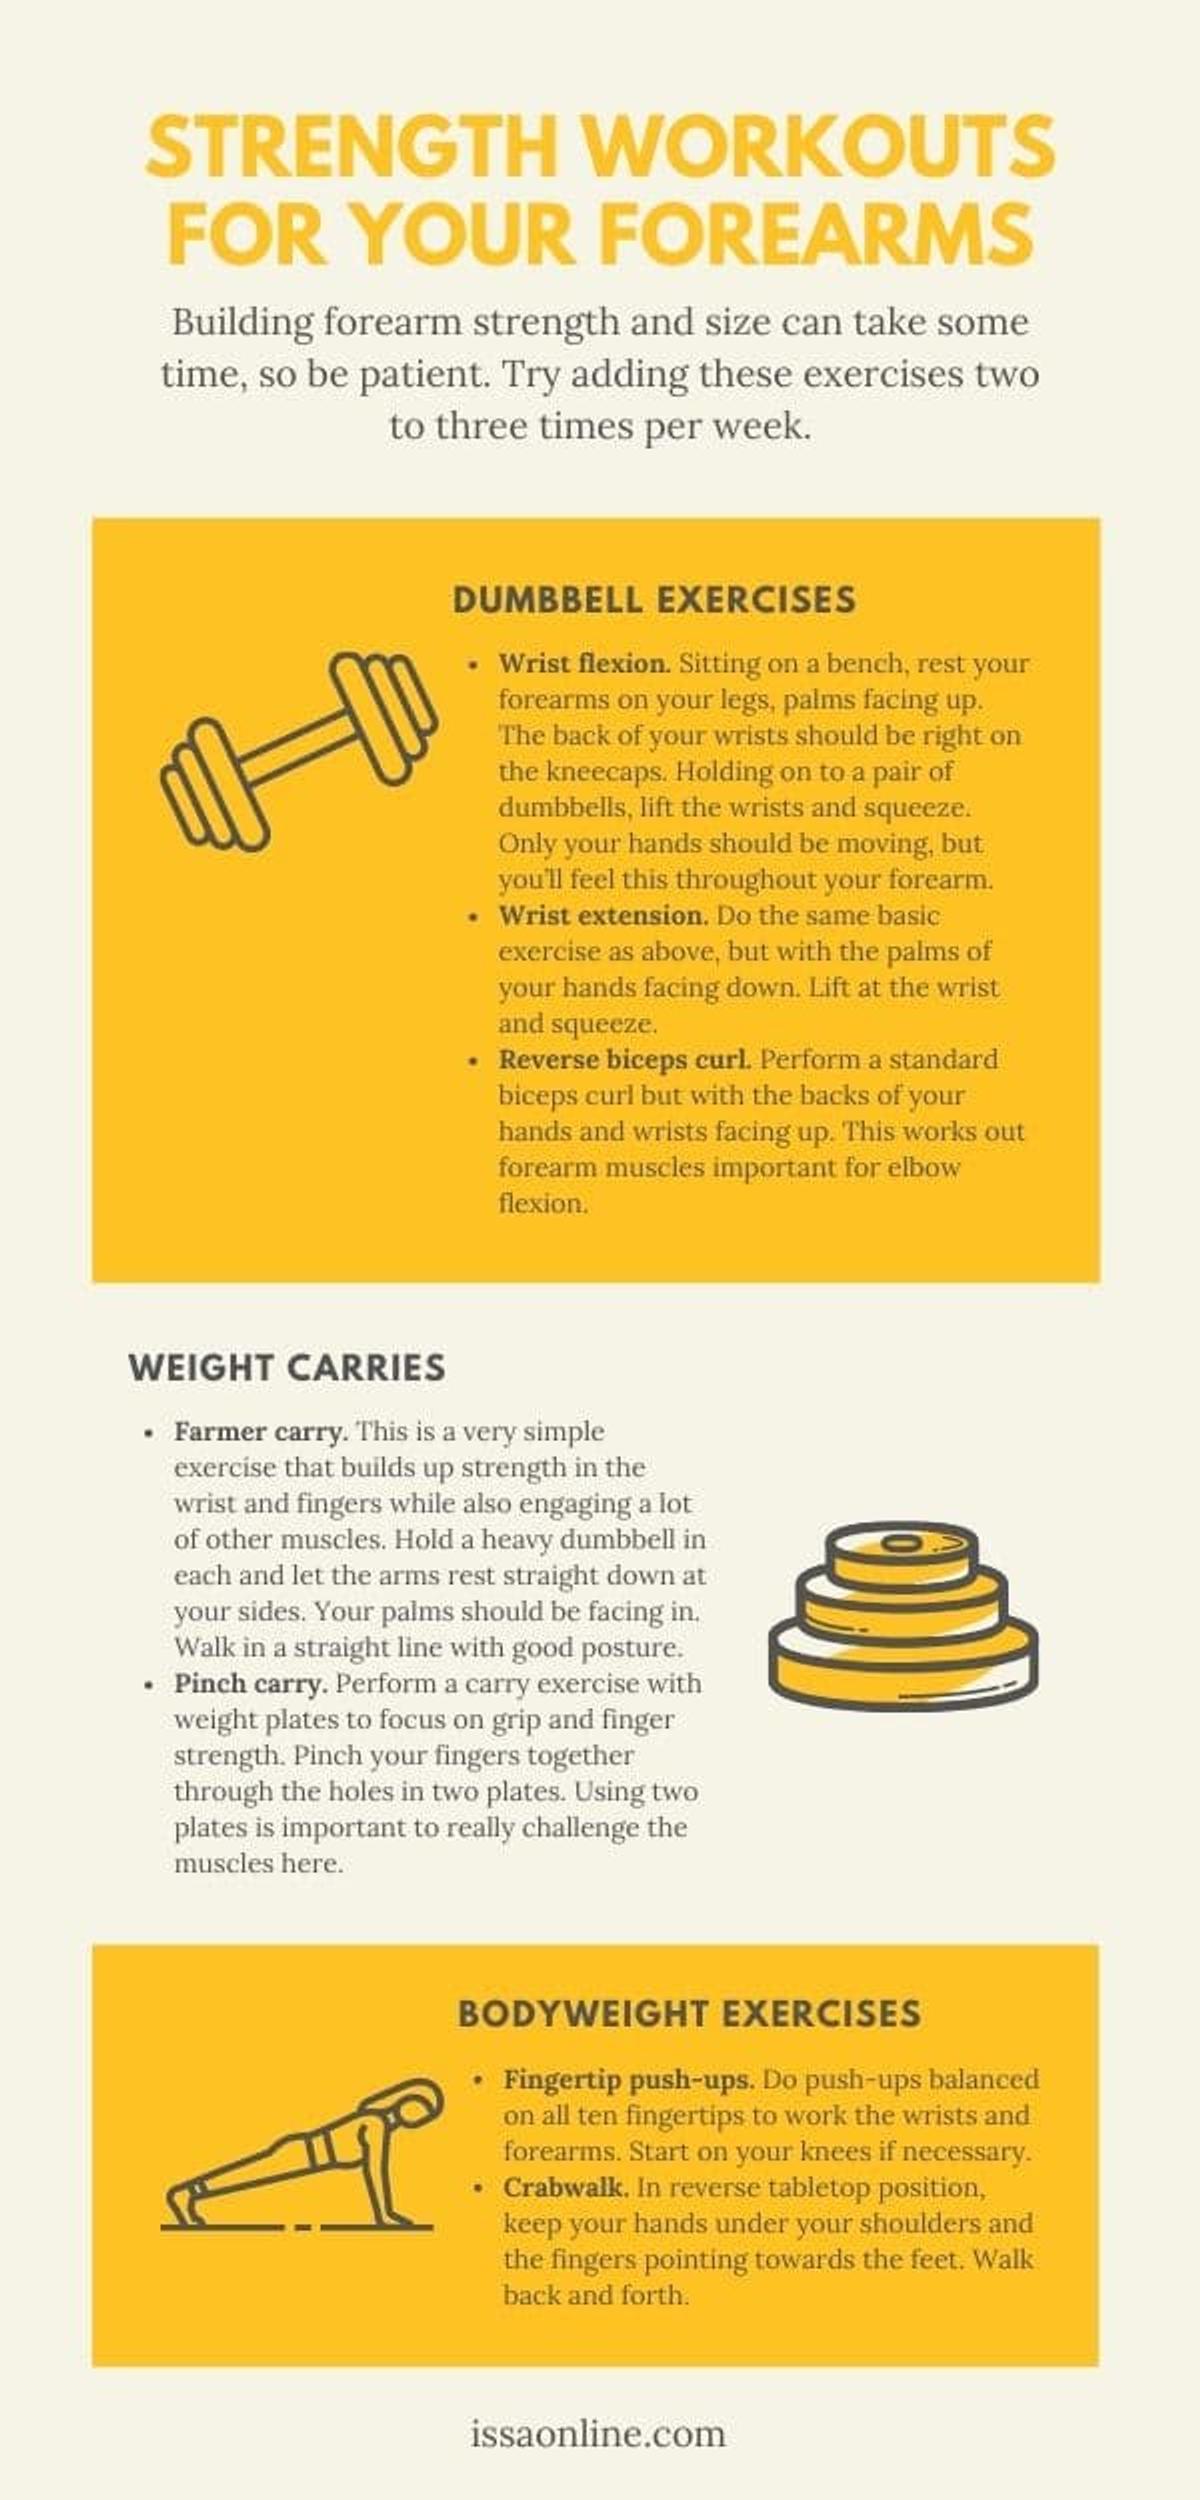 ISSA, International Sports Sciences Association, Certified Personal Trainer, ISSAonline, How to Get Bigger Forearms with a Few Simple Exercises, Infographic